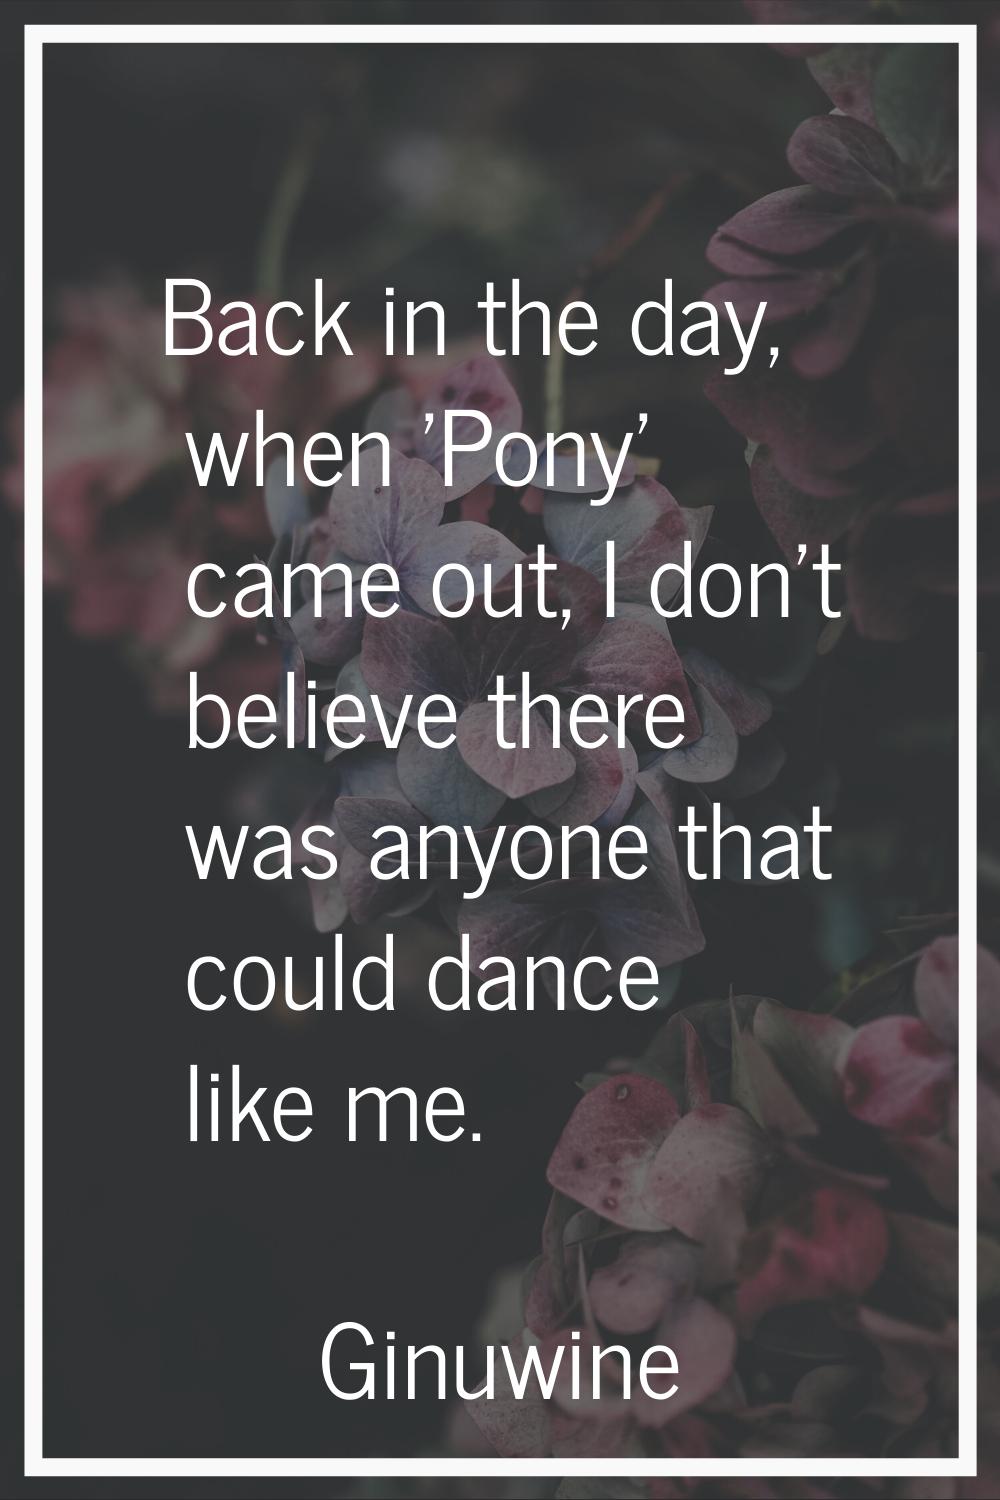 Back in the day, when 'Pony' came out, I don't believe there was anyone that could dance like me.